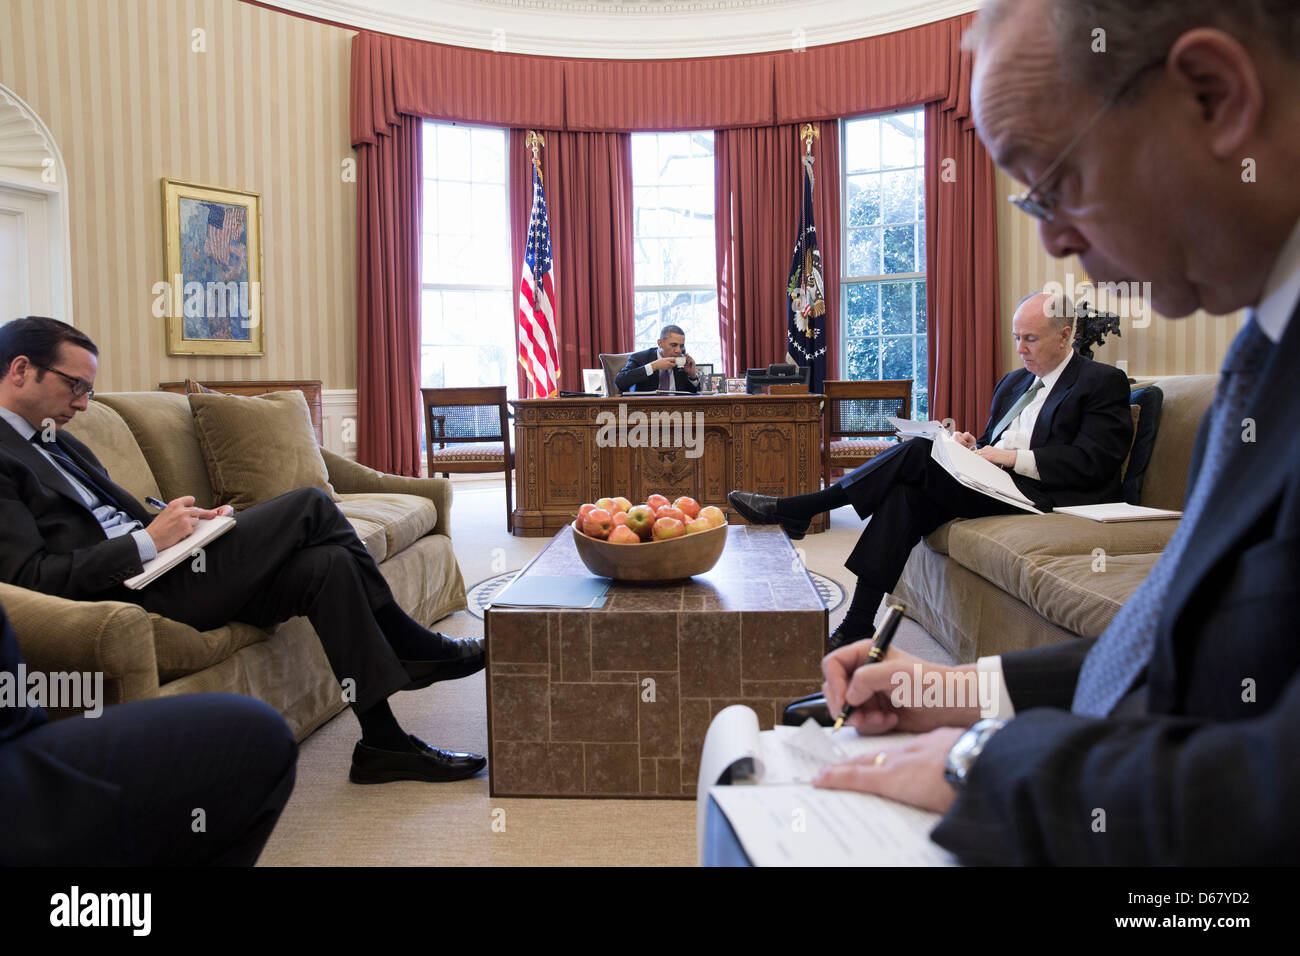 Advisors take notes as United States President Barack Obama has a foreign leader phone call in the Oval Office, March 14, 2013. Seated, from left, are: Evan Medeiros, Director for China, Taiwan, and Mongolia Affairs; National Security Advisor Tom Donilon; and Danny Russel, Senior Director for Asian Affairs..Mandatory Credit: Pete Souza - White House via CNP Stock Photo